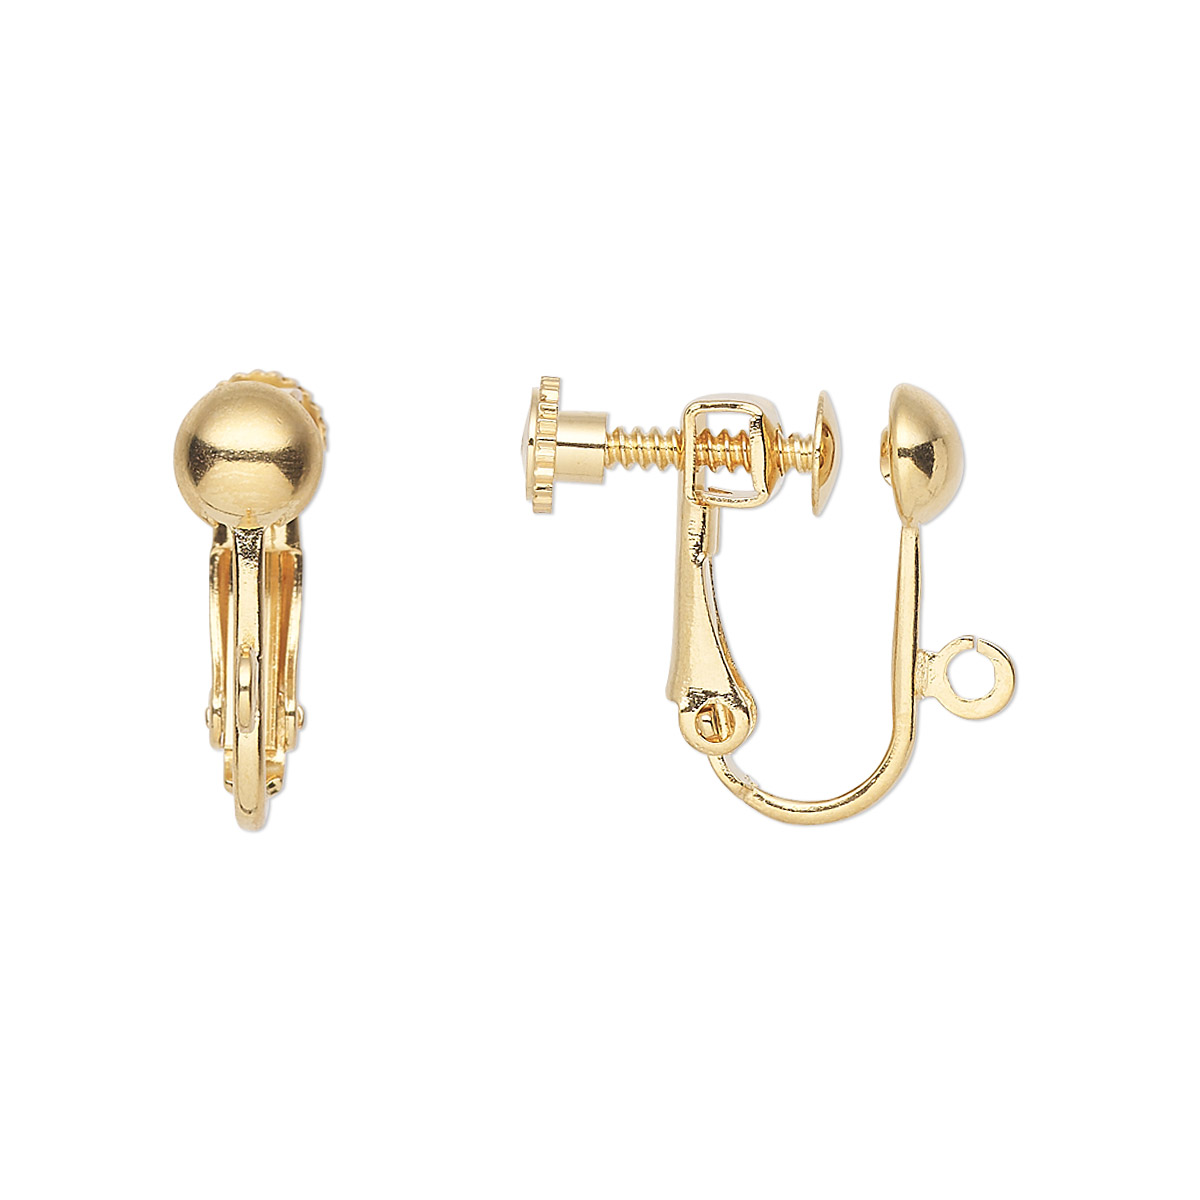 Earring, clip-on, gold-plated brass, 15mm hinged screwback with 5mm ...